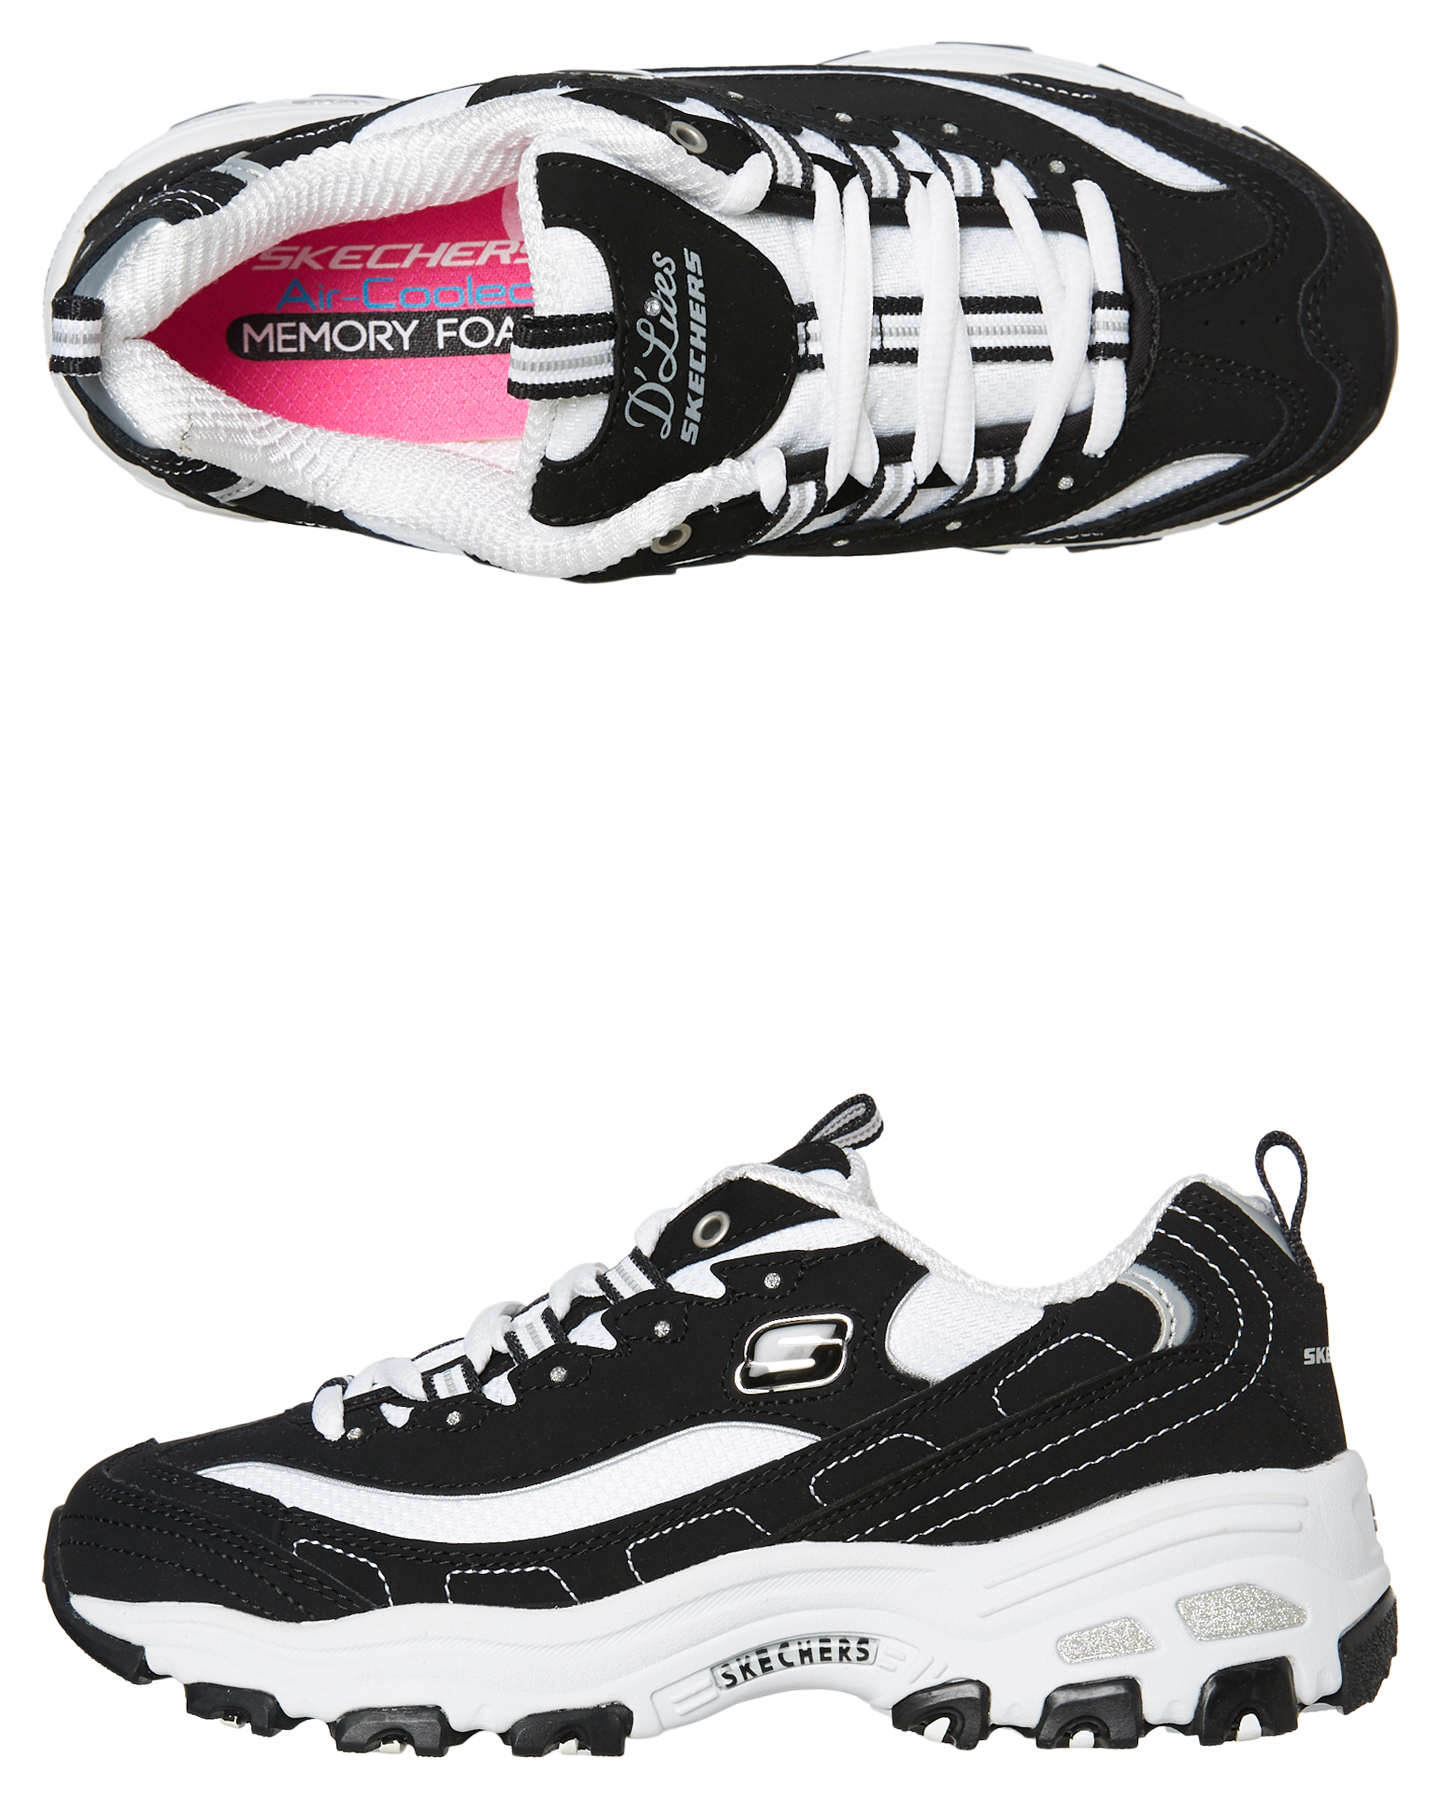 sketchers for cheap